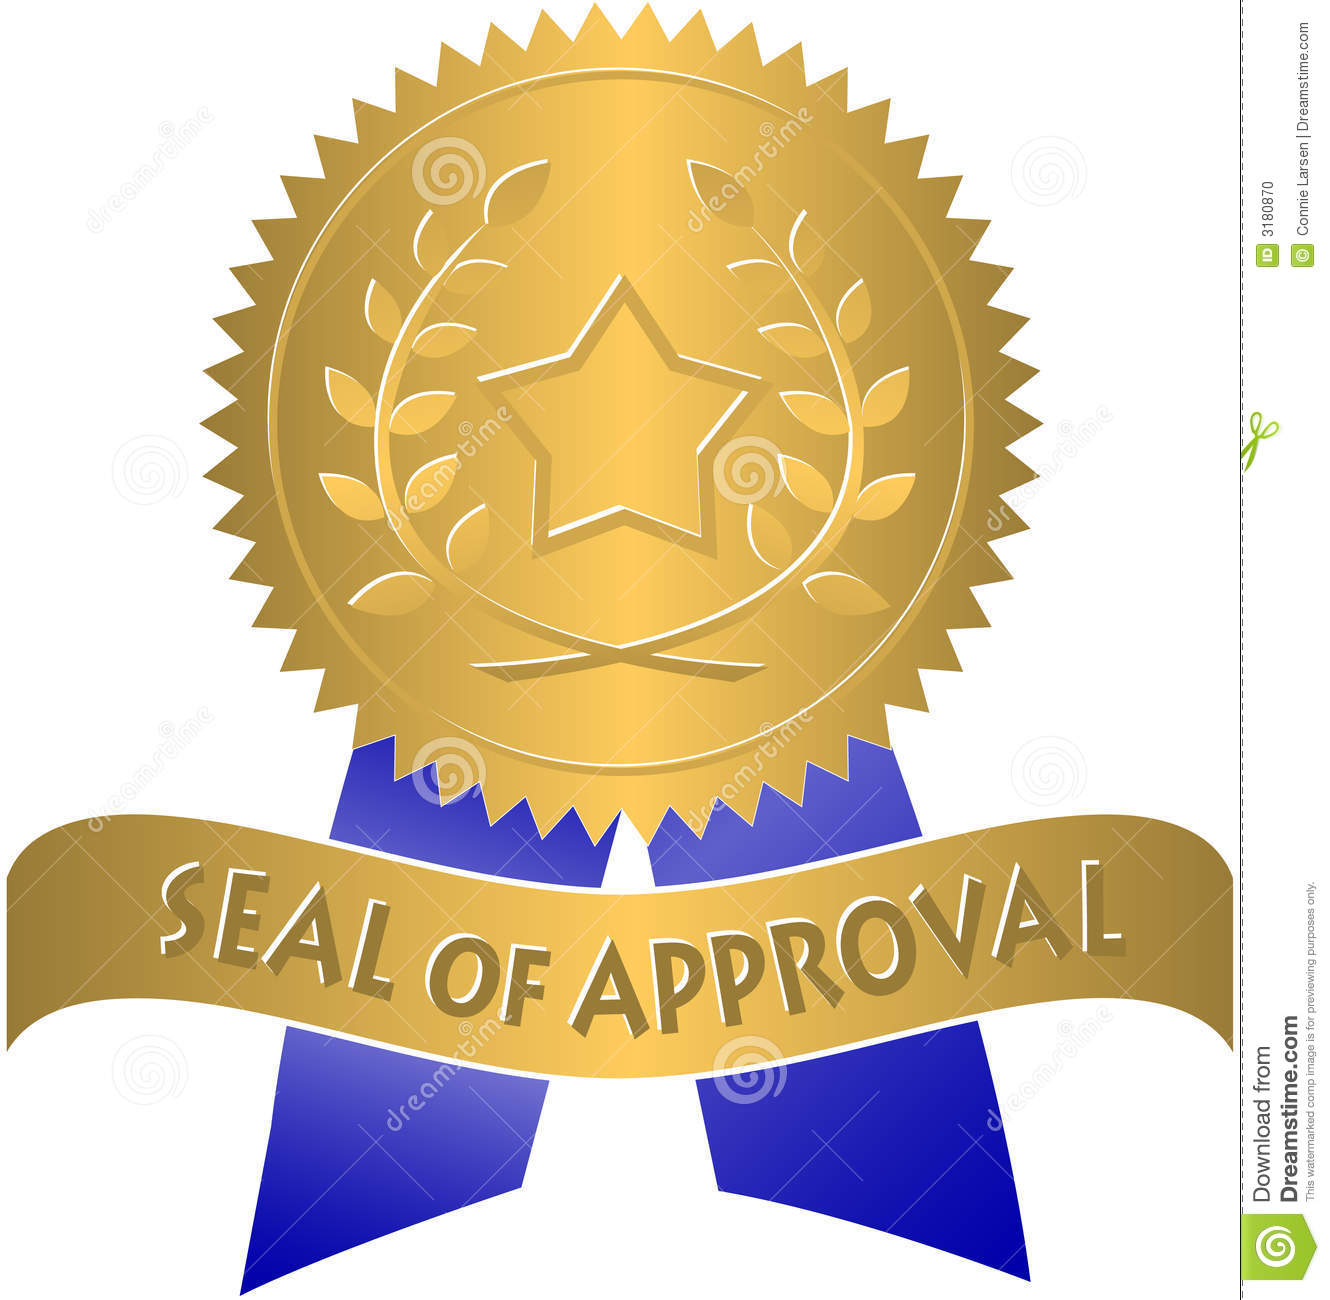 Seal Of Approval Eps Stock Photo   Image  3180870